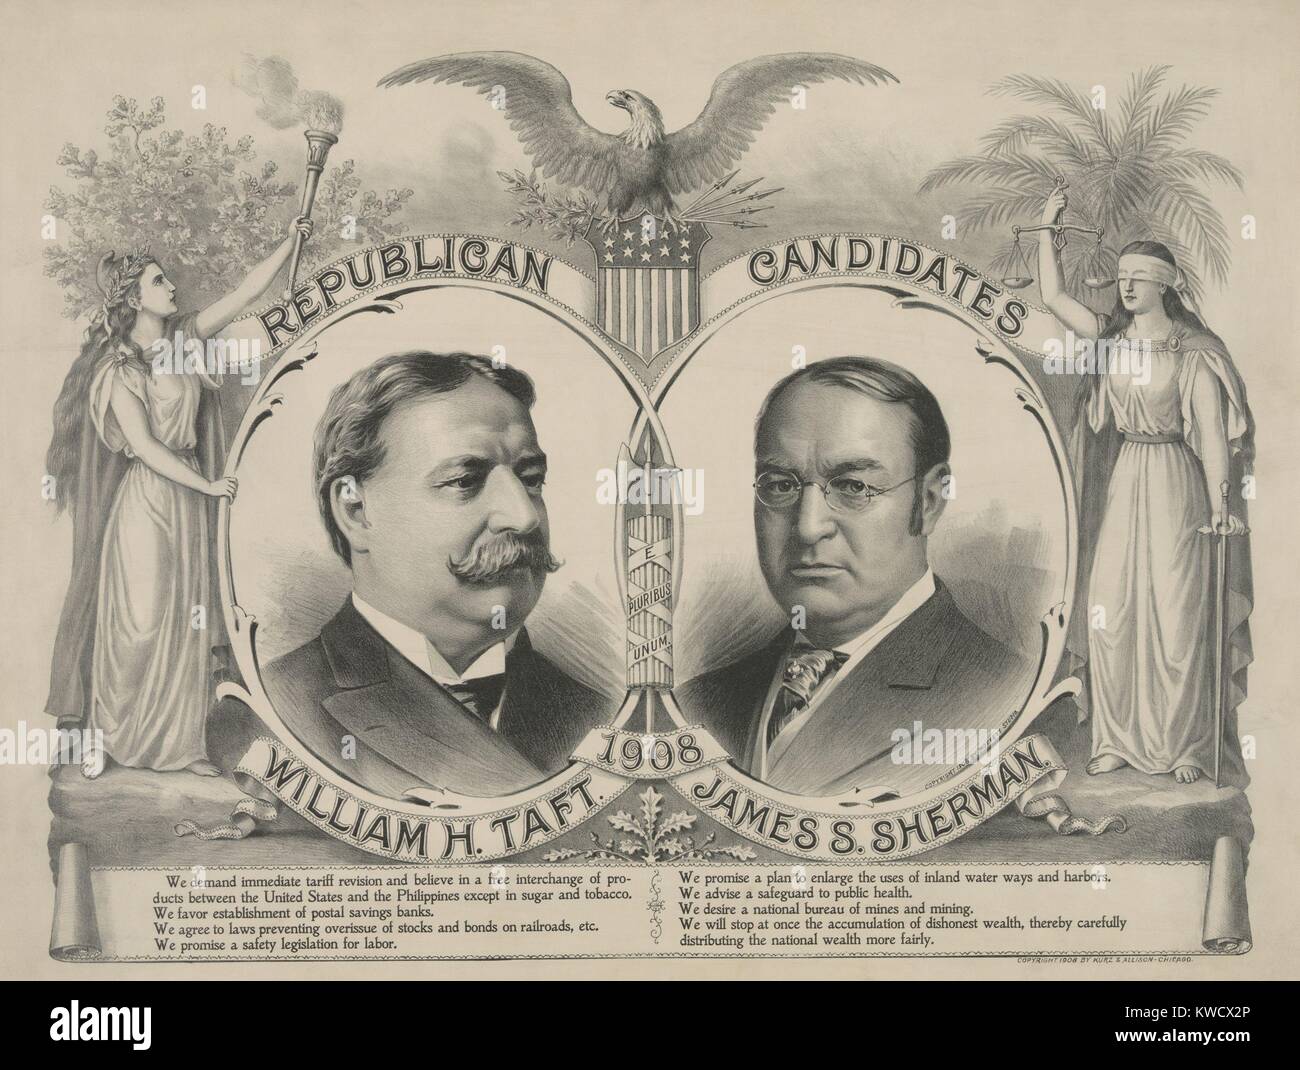 Campaign poster for the Republican candidates in the 1908 Presidential election. Below the portraits of William Howard Taft and John Sherman are statements from their moderate Platform (BSLOC 2017 2 115) Stock Photo